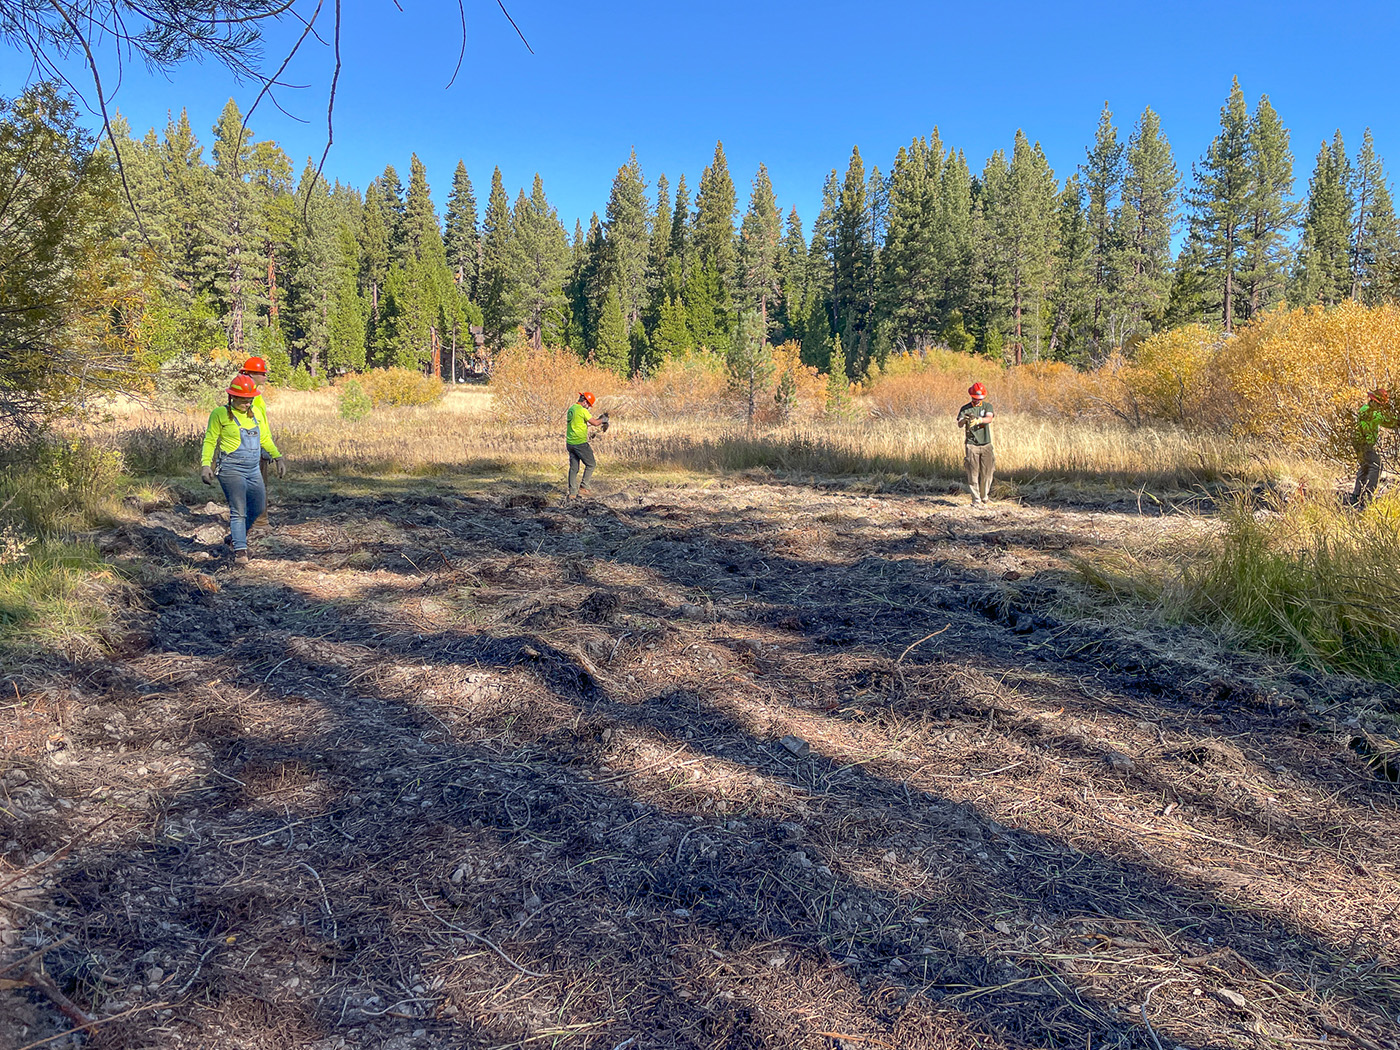 Crew members spreading seed in a meadow with trees behind